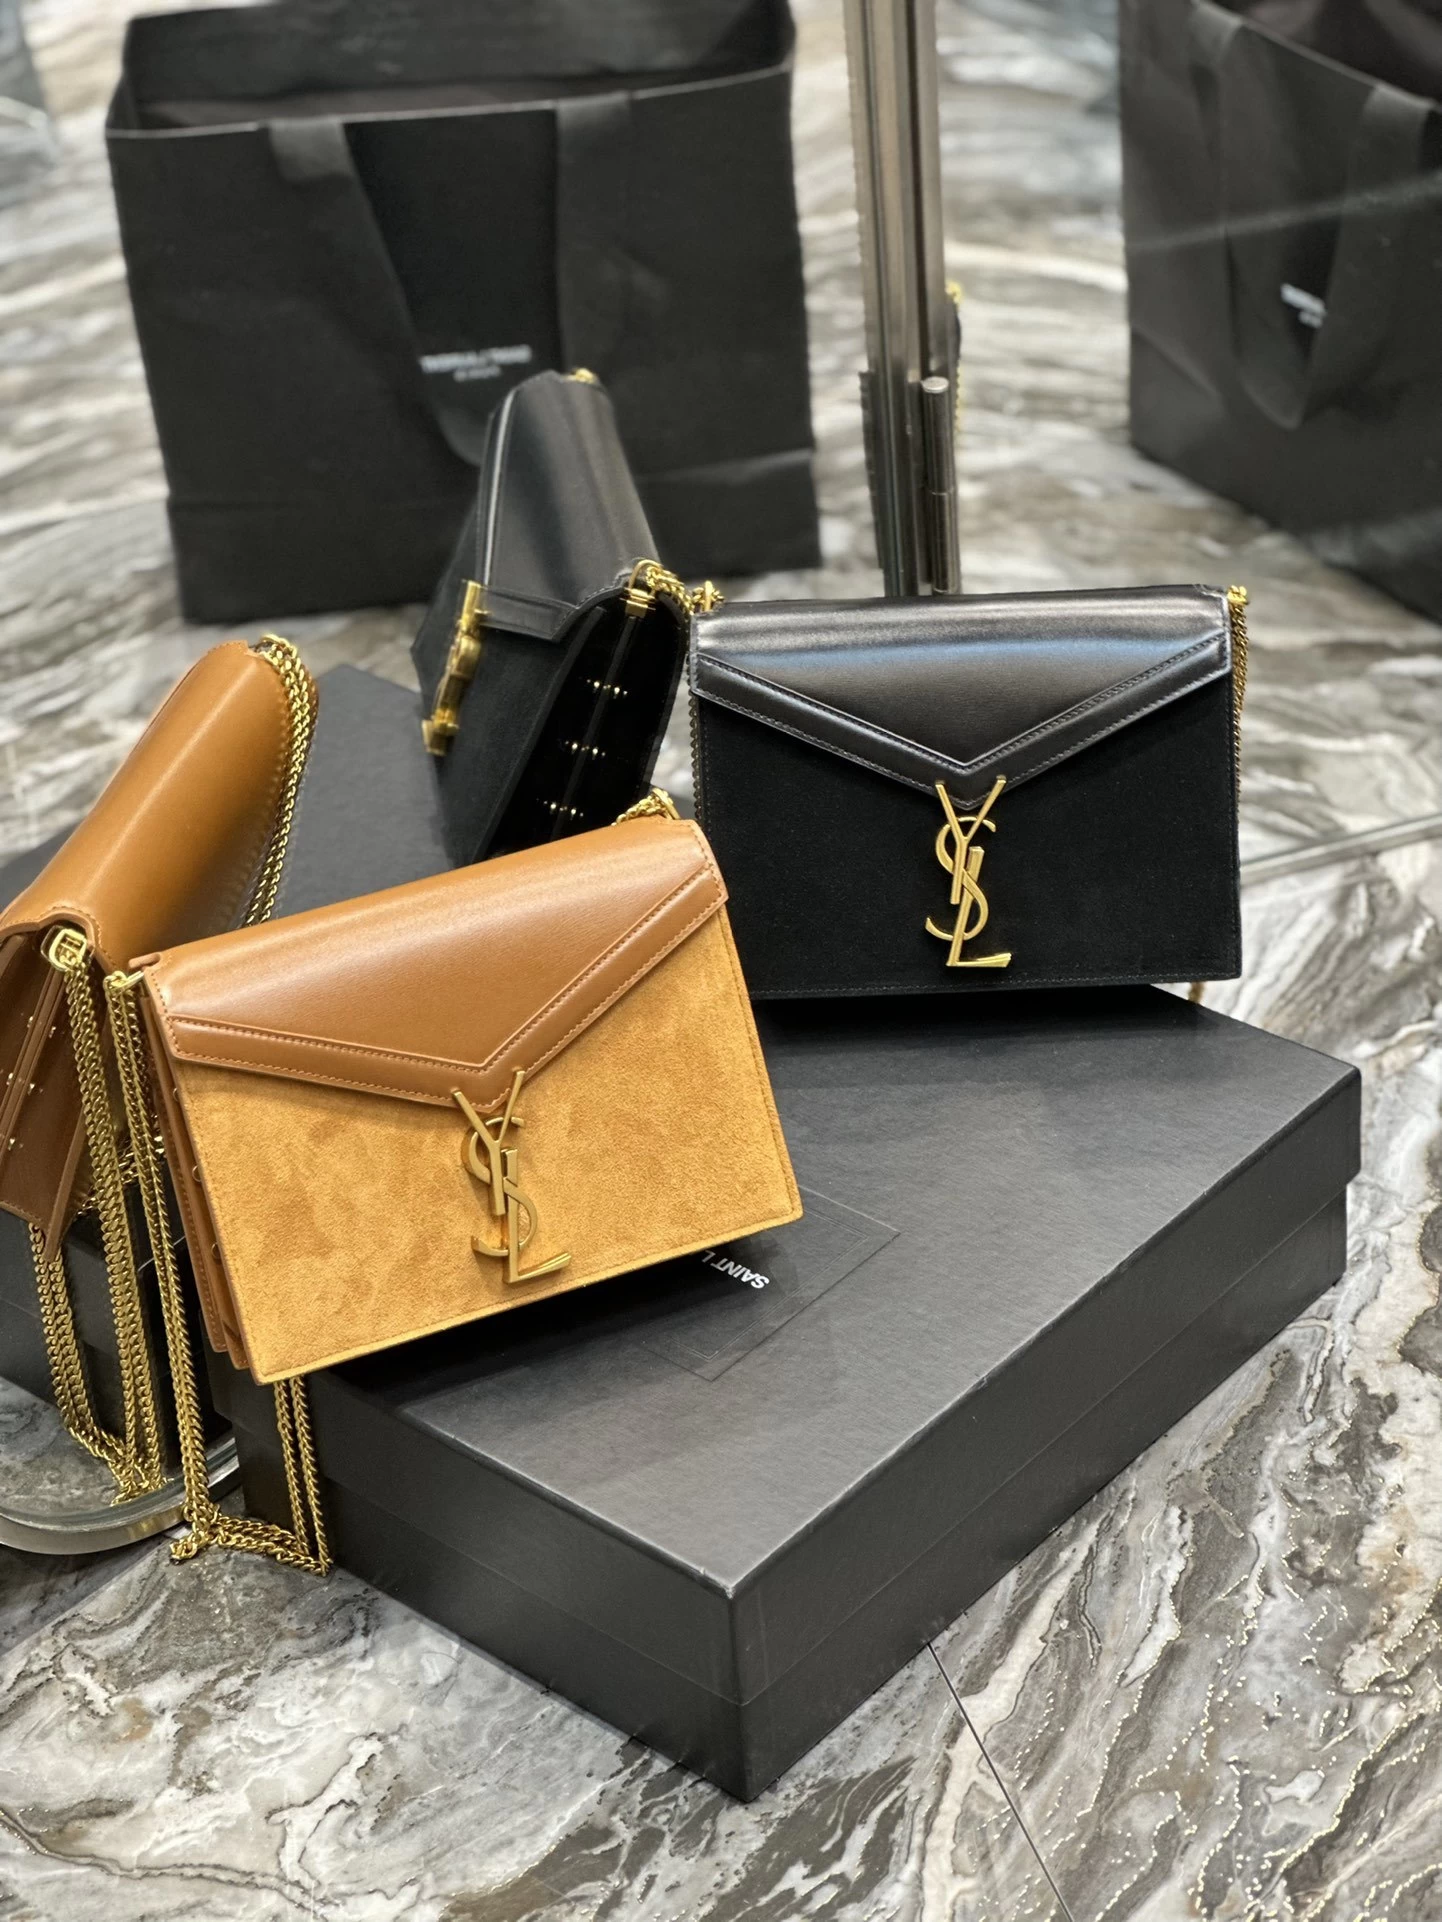 Wholesale Luxury Fashion Replicas Bags Designer Handbags Online Store AAA  Distributors - China Replicas Bags and Guangzhou Bags price